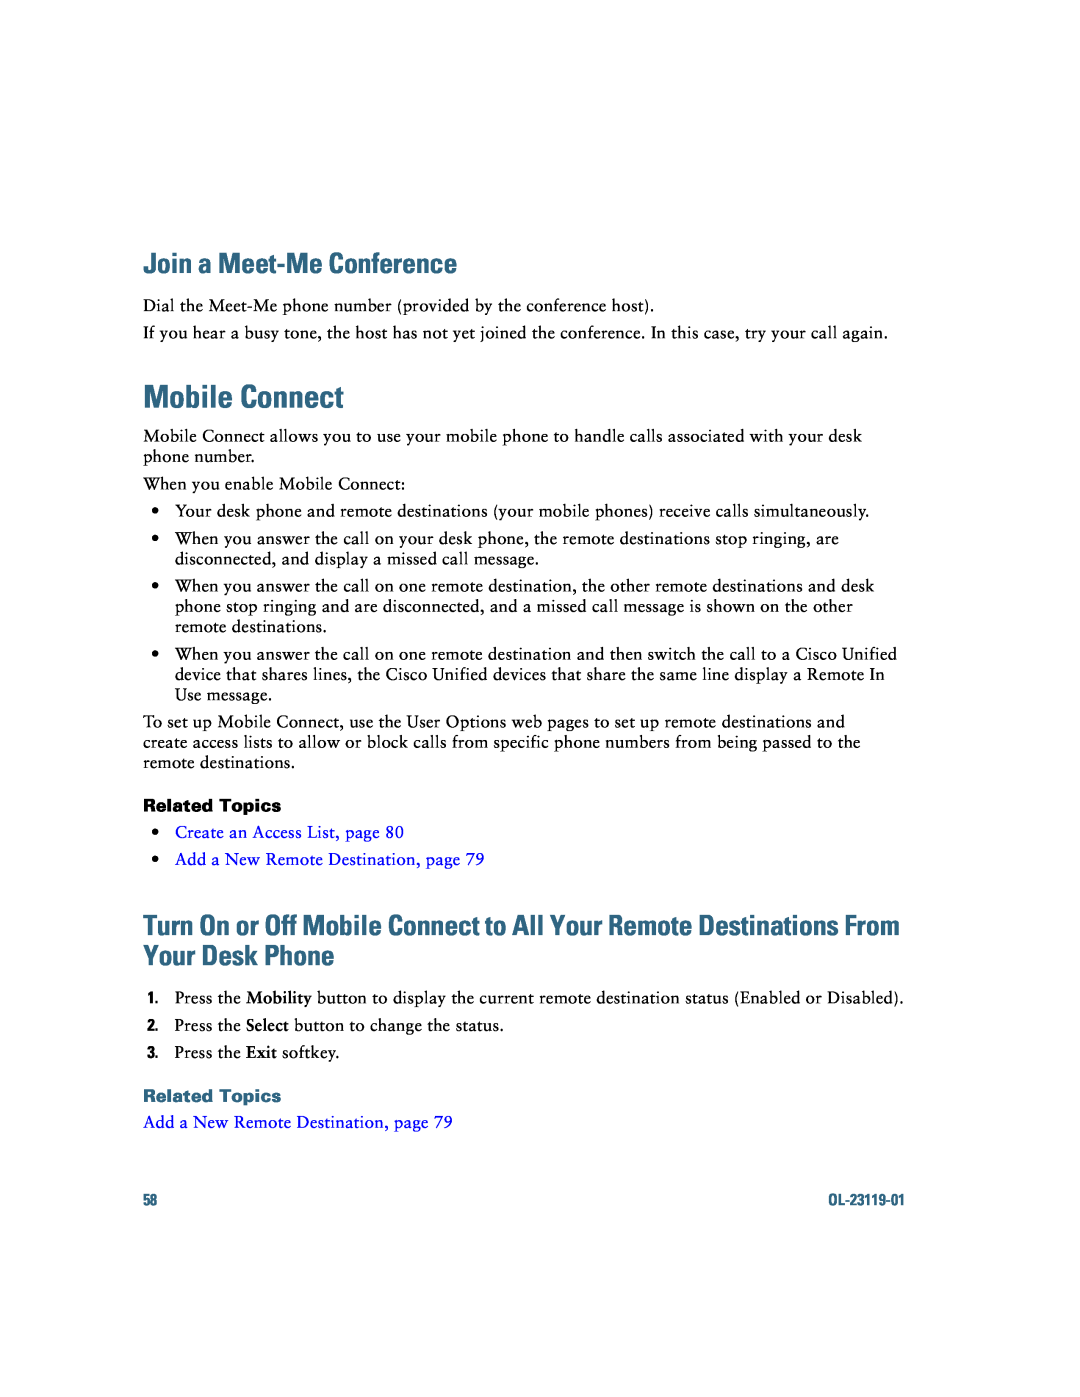 Cisco Systems IP Phone 8941 and 8945 manual Mobile Connect, Join a Meet-Me Conference, Related Topics 